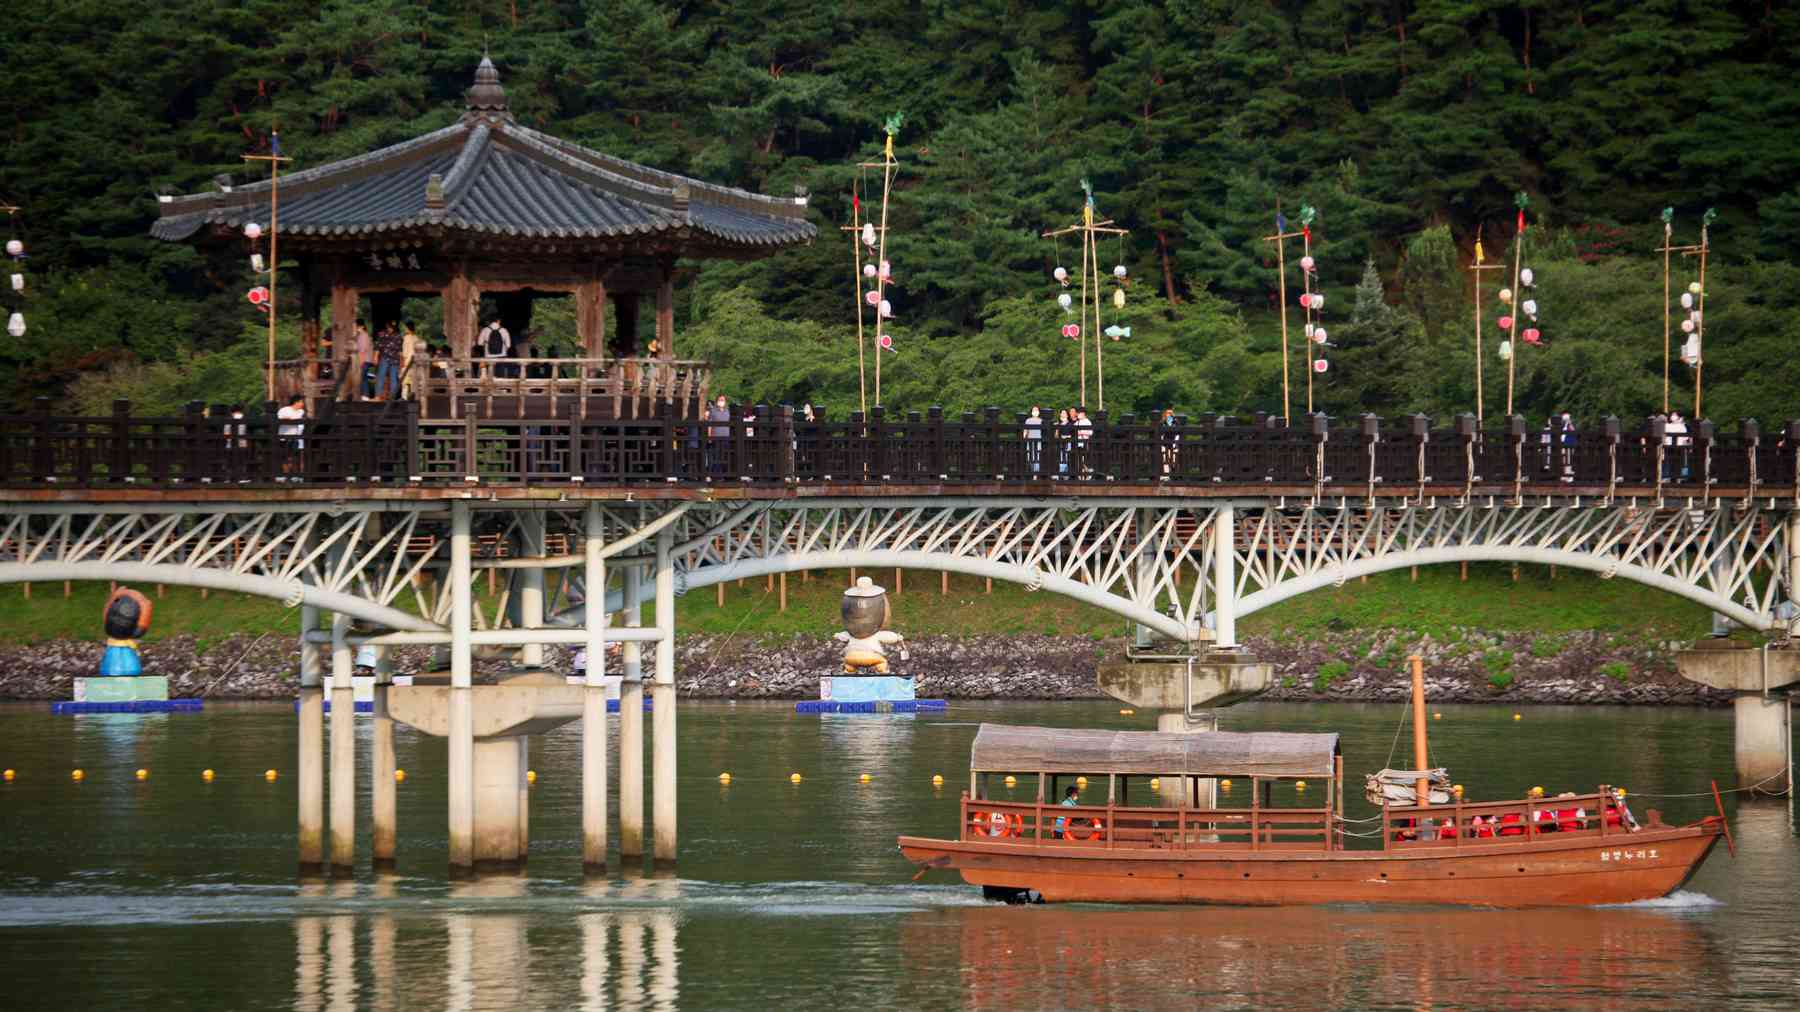 A picture of Woryeong Bridge (월영교) on the Nakdong River in Andong City, South Korea.